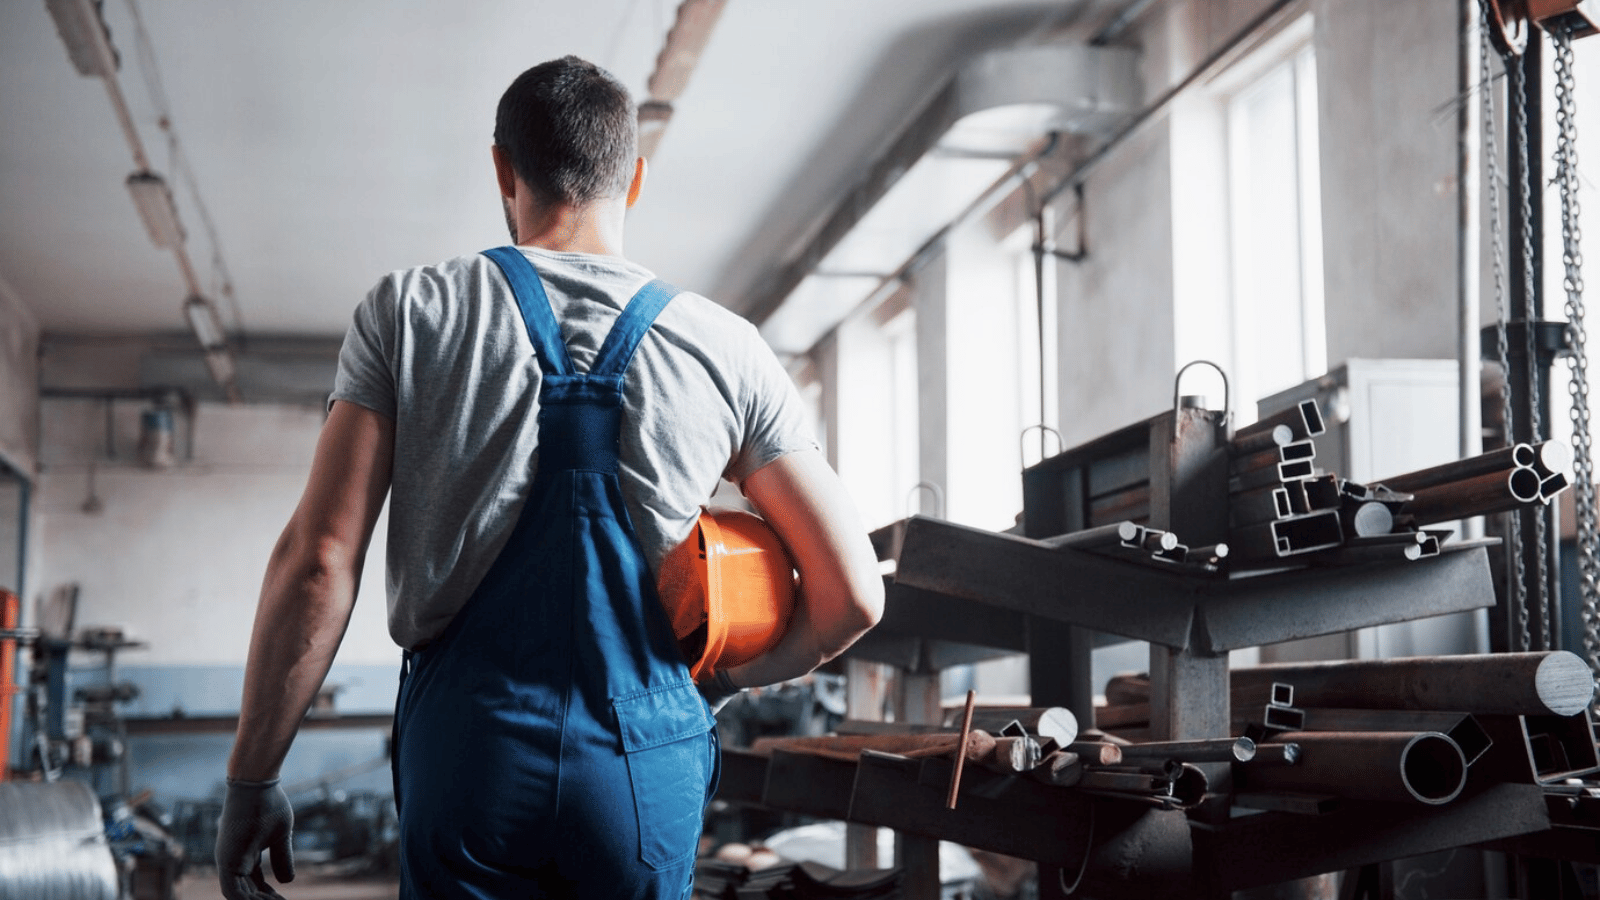 A person in overalls walking through a factory.